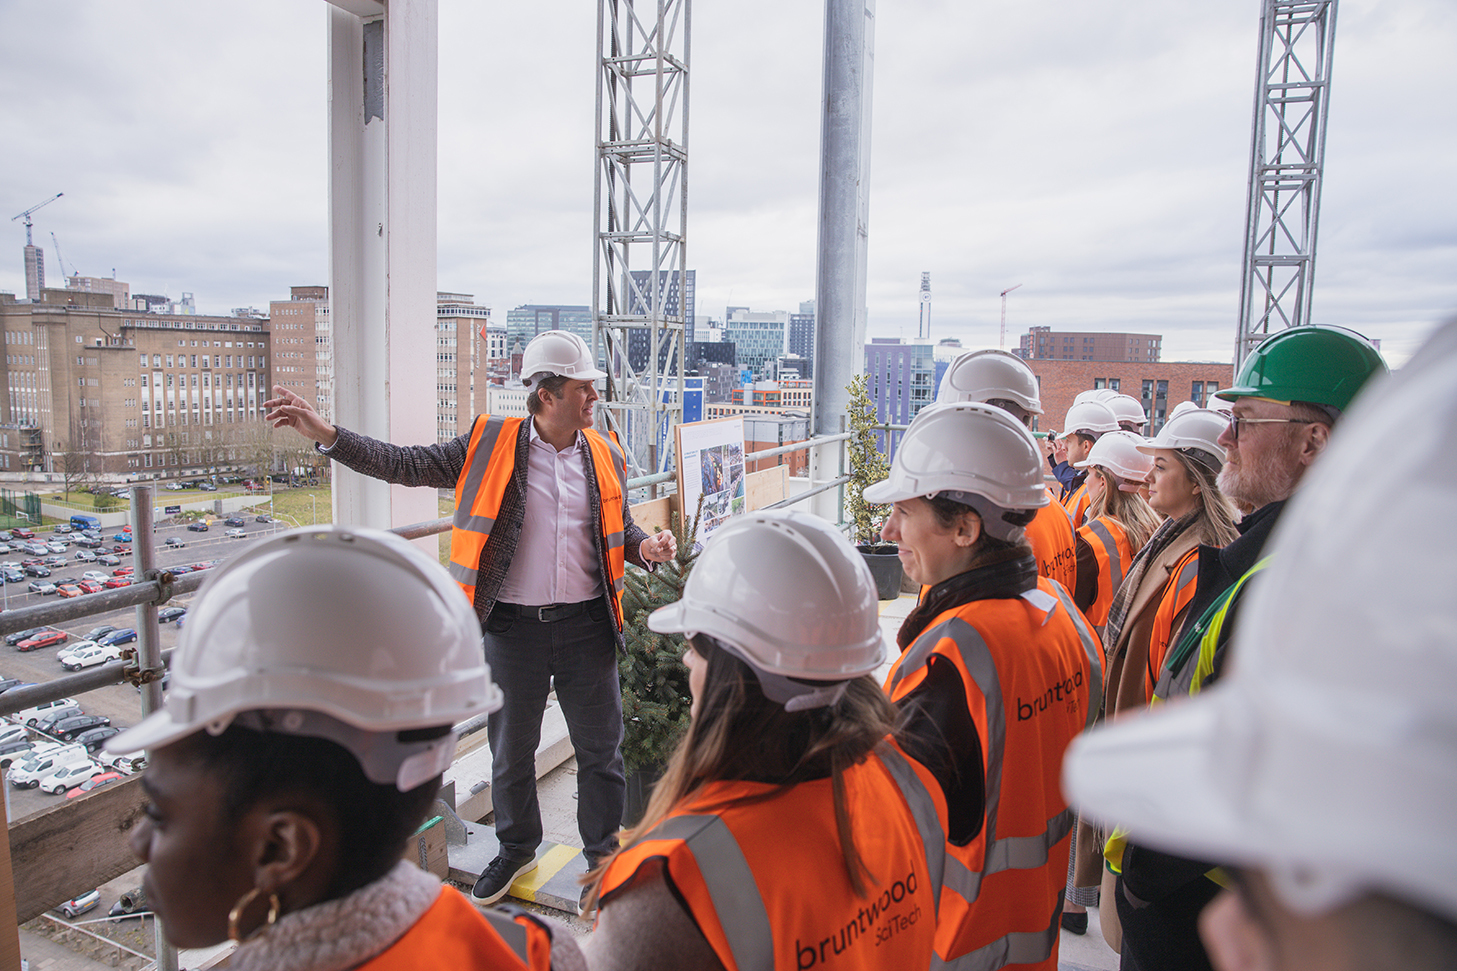 Bruntwood Topping out